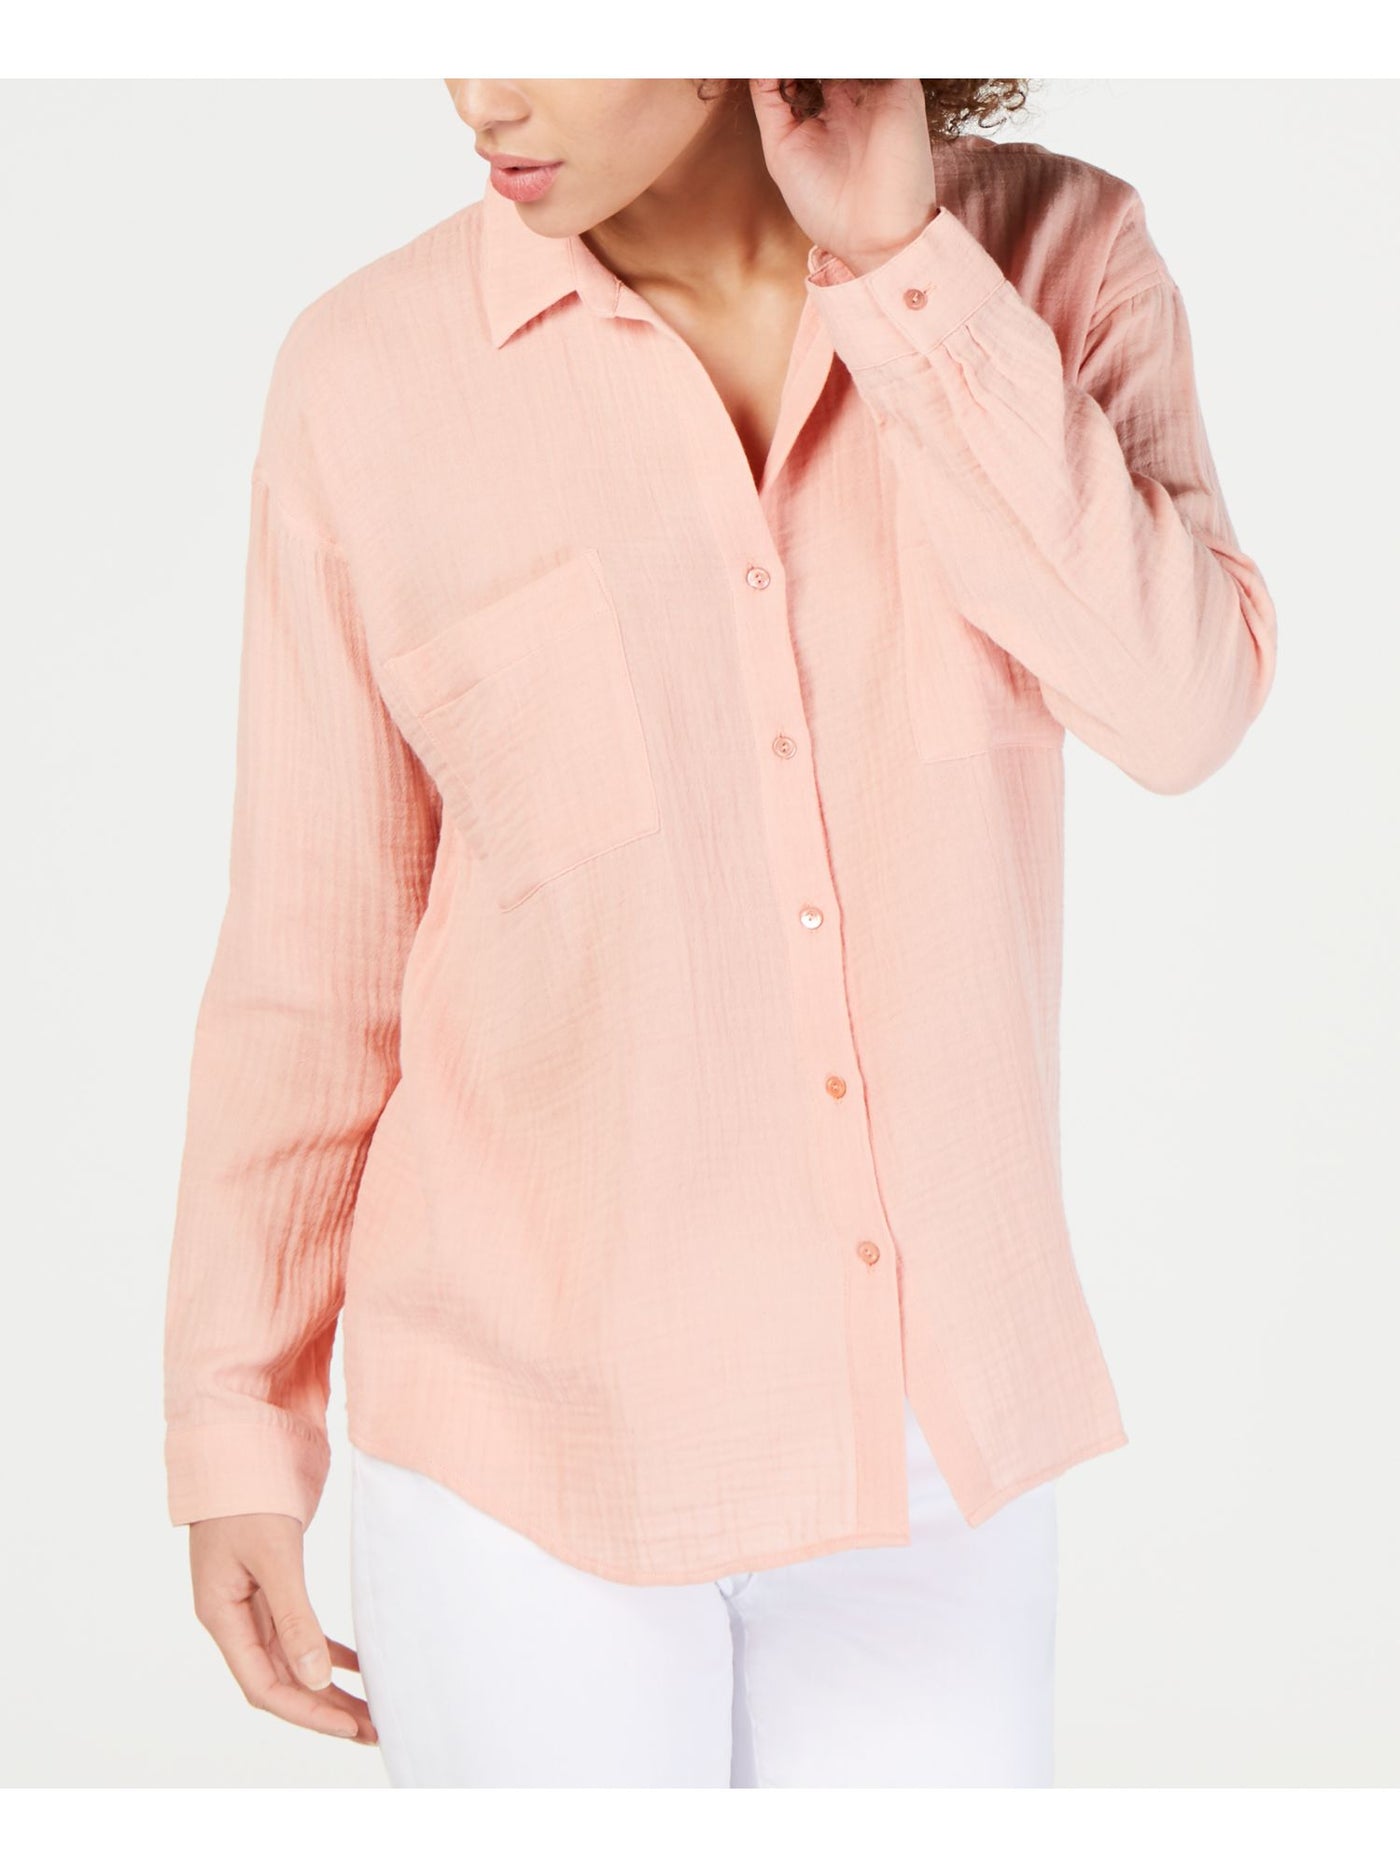 EILEEN FISHER Womens Coral Long Sleeve Collared Top Petites SP